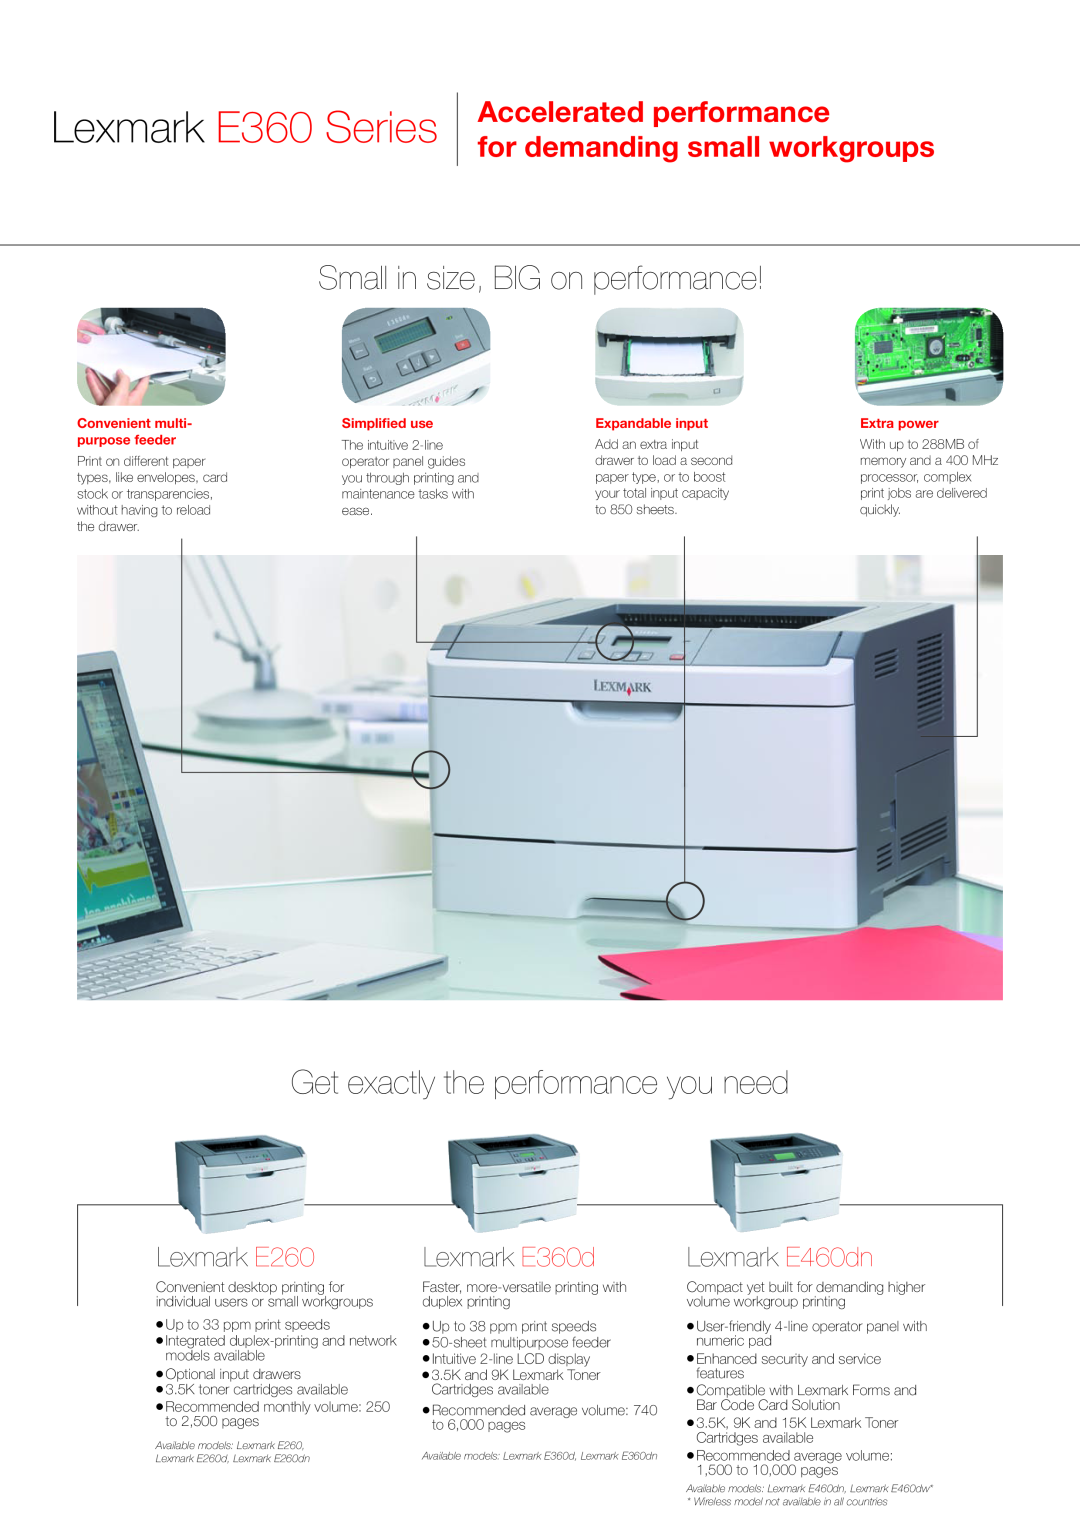 Lexmark Small in size, BIG on performance, Get exactly the performance you need, Lexmark E360 Series, Lexmark E260 